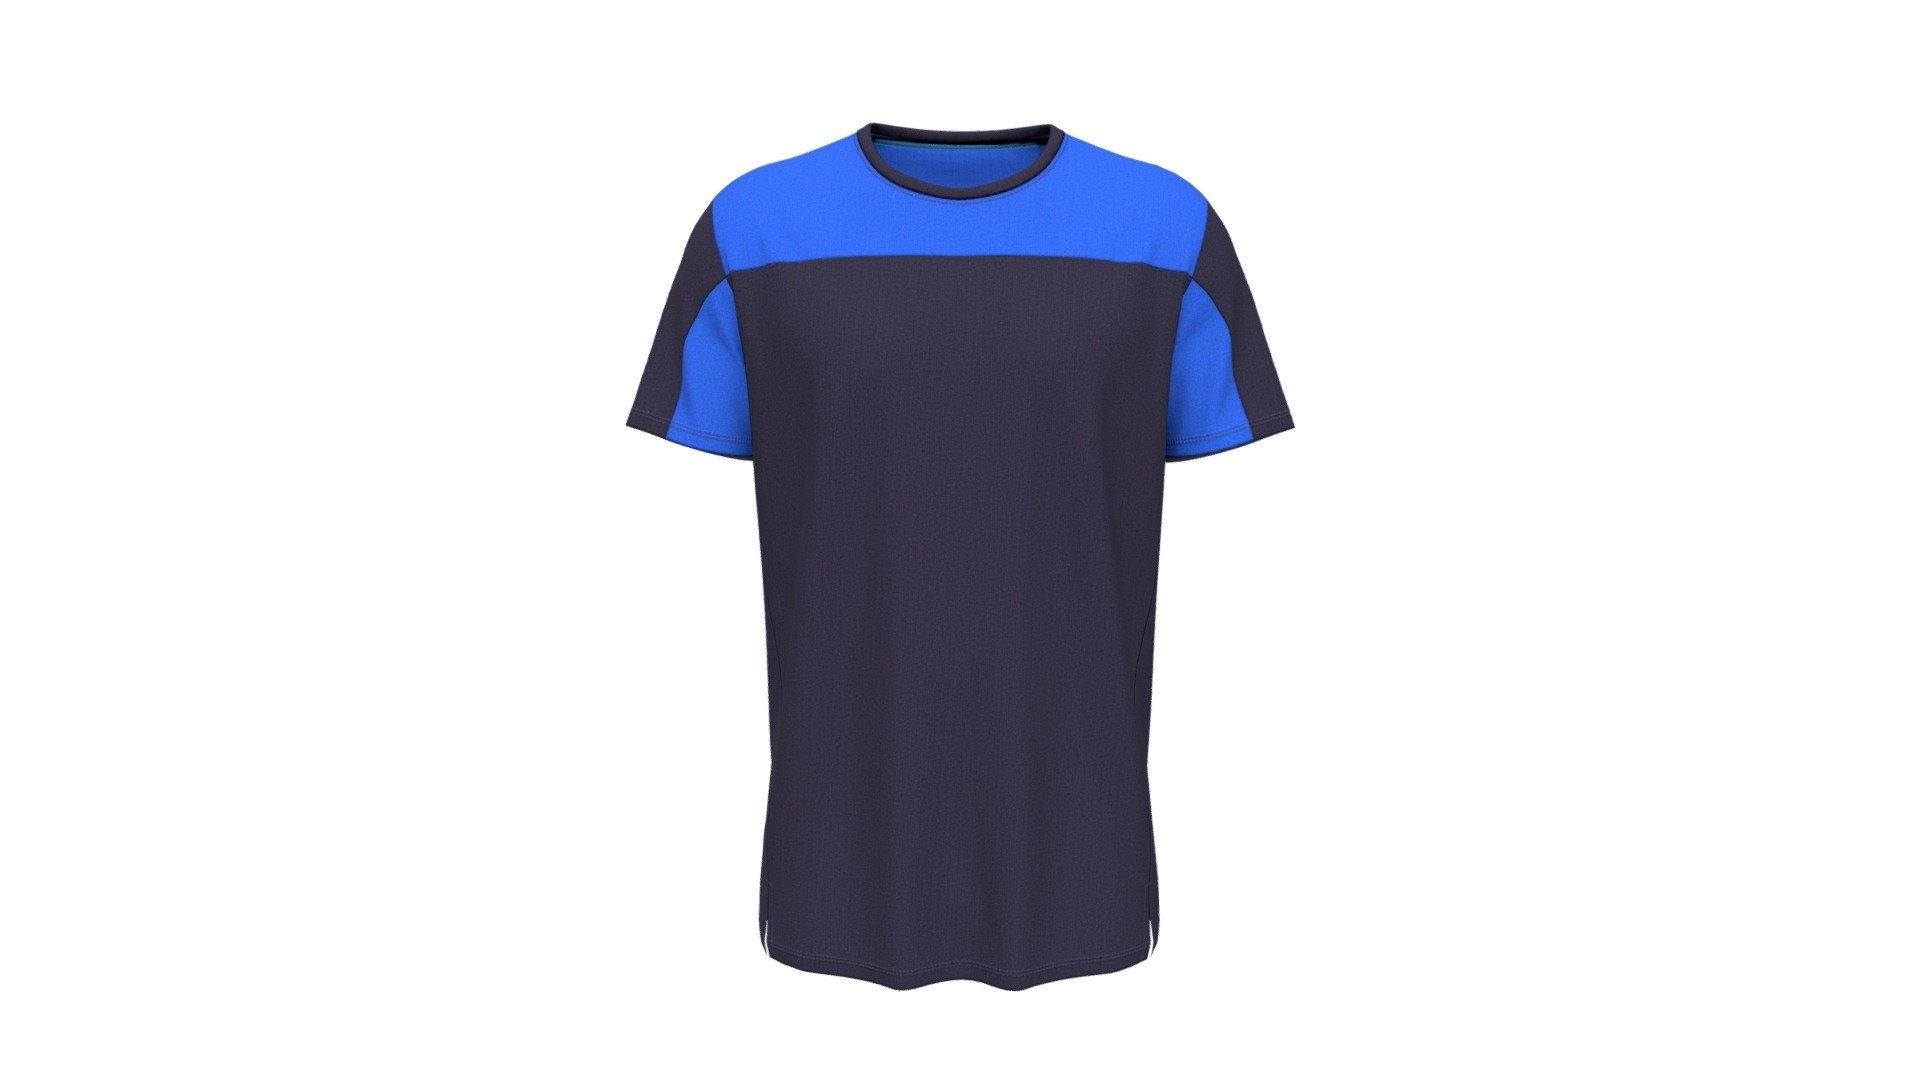 Men Color Block Tee
Version V1.0

Realistic high detailed Men T-shirt with high resolution textures. Model created by our unique processing &amp; Optimized for Web and AR / VR. 

Features

Optimized &amp; NON-Optimized obj model with 4K texture included




Optimized for AR/VR/MR

4K &amp; 2K fabric texture and details

Optimized model is 1.16MB

NON-Optimized model is 11.7MB

Knit fabric texture and print details included

GLB file in 2k texture size is 5.22MB

GLB file in 4k texture size is 23.7MB

Suitable for web application configurator development.

Fully unwrap UV

The model has 1 material

Includes high detailed normal map

Unit measurment was inch

Texture map: Base color, OcclusionRoughnessMetallic(ORM), Normal

NB: Tpose &amp; Apose Model available with request.

We make the digital 3D apparel design service affordable and compatible for your fast moving business.
For more details or custom order send email: hello@binarycloth.com


Website:binarycloth.com - Men Color Block Tee - Buy Royalty Free 3D model by BINARYCLOTH (@binaryclothofficial) 3d model